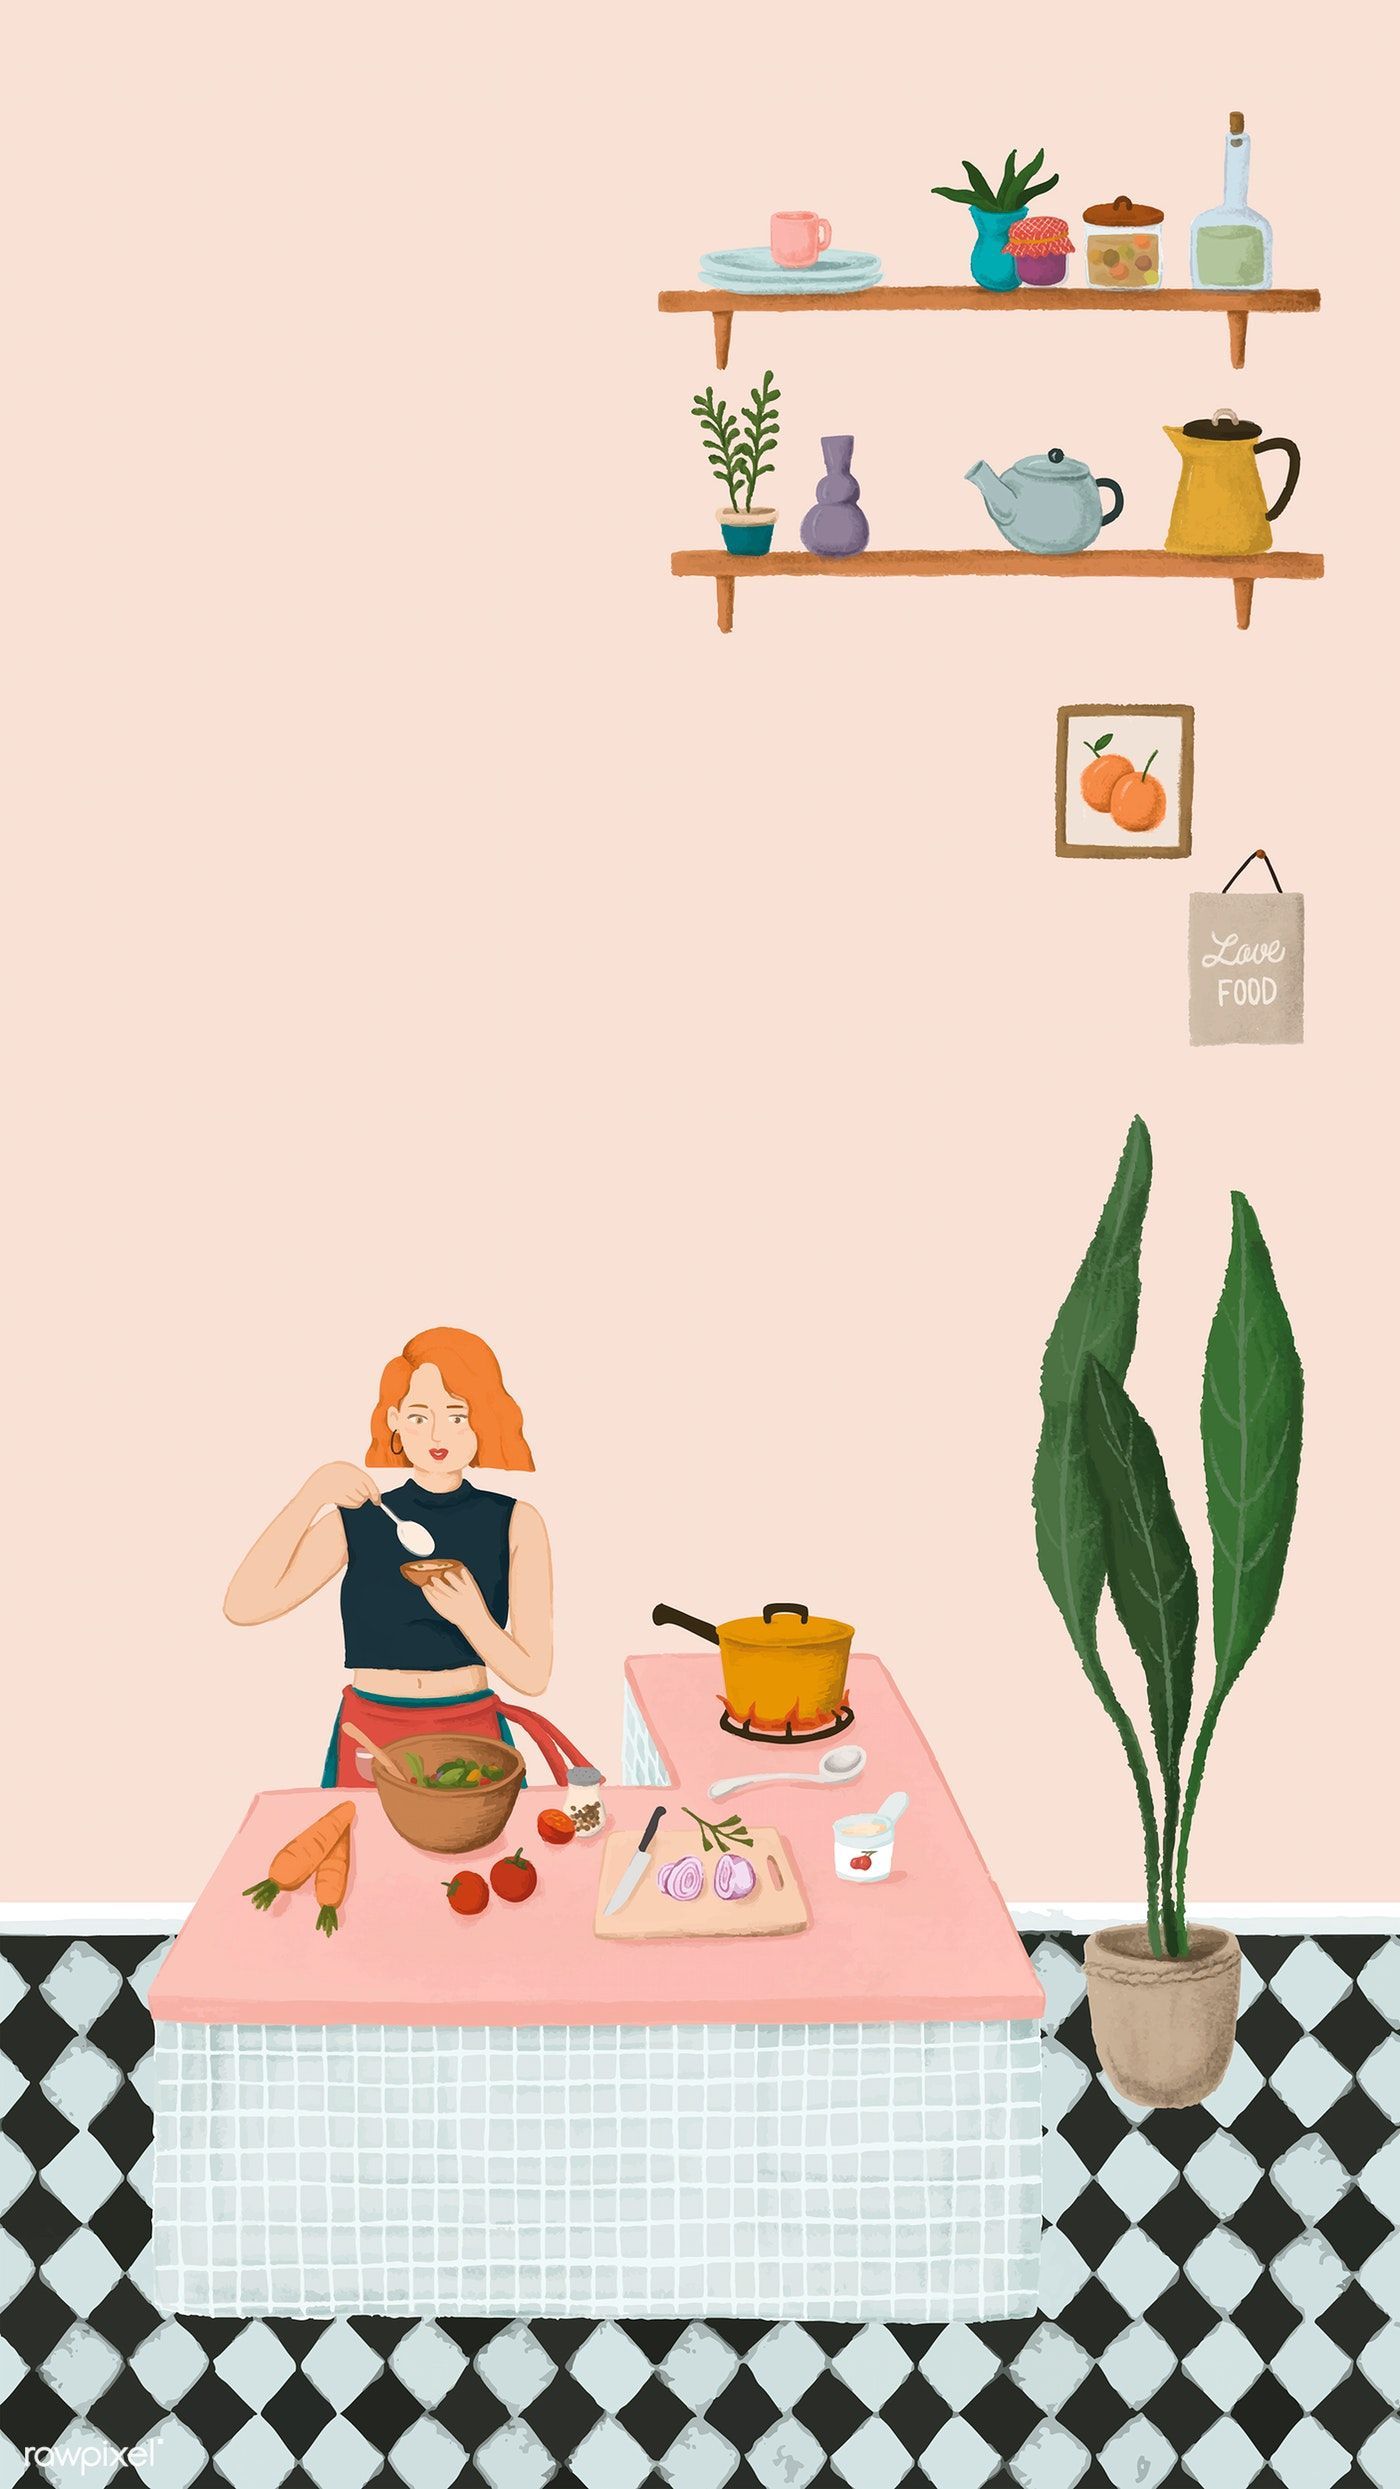 Download premium vector of Girl cooking in a kitchen sketch style mobile. Girl cooking, Watercolor pattern background, Cute wallpaper